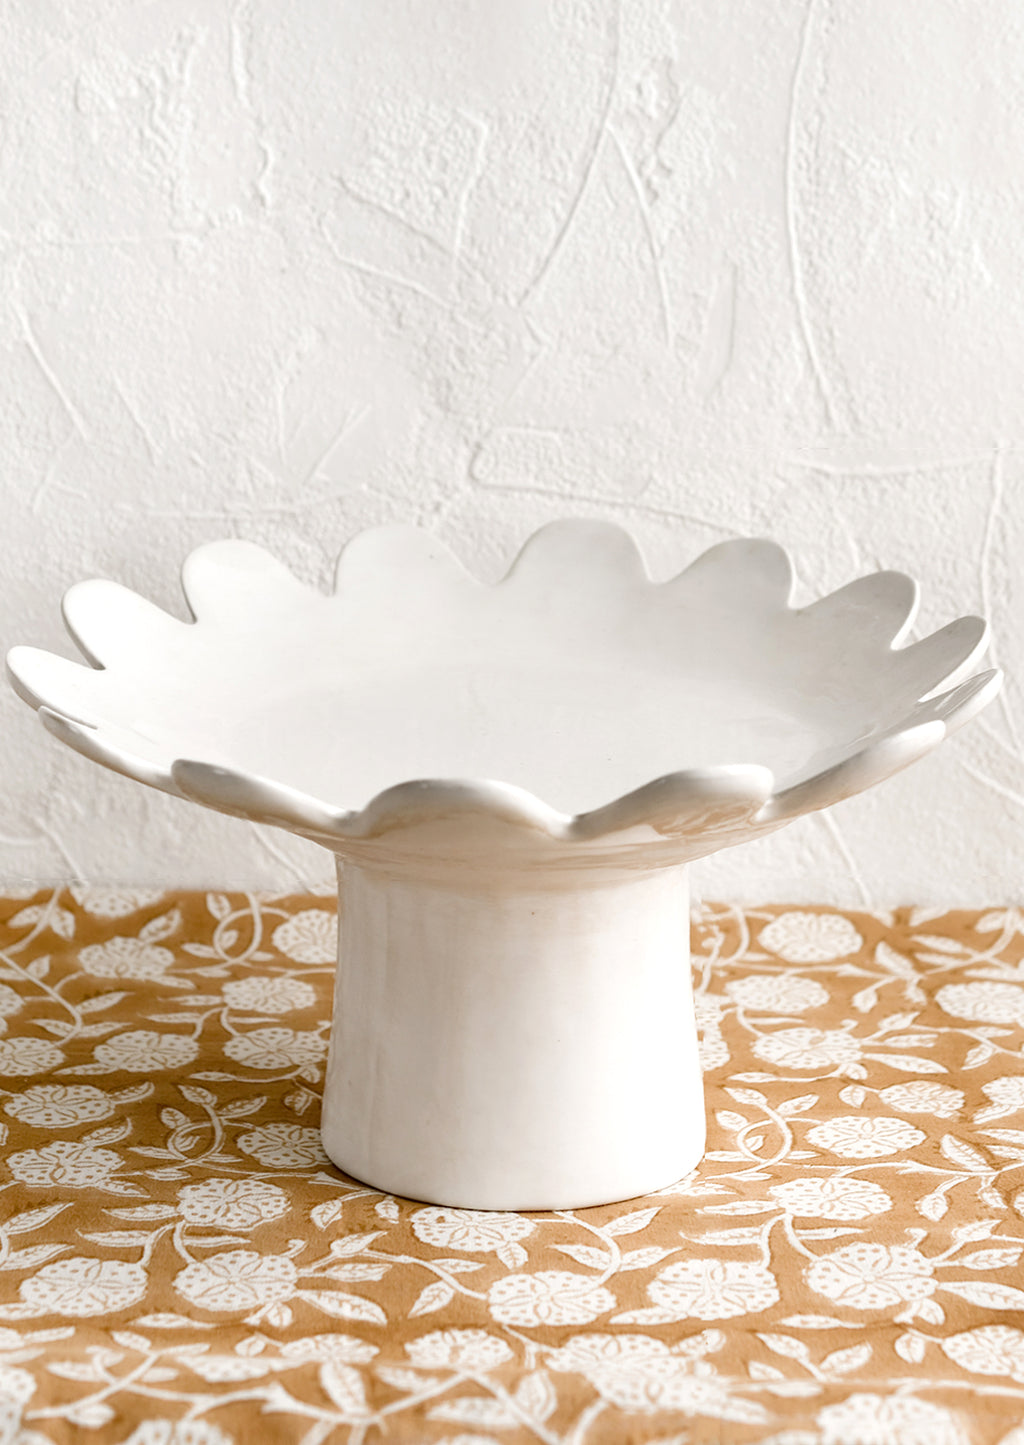 1: A pedestal riser in gloss white ceramic with scalloped plate shape.